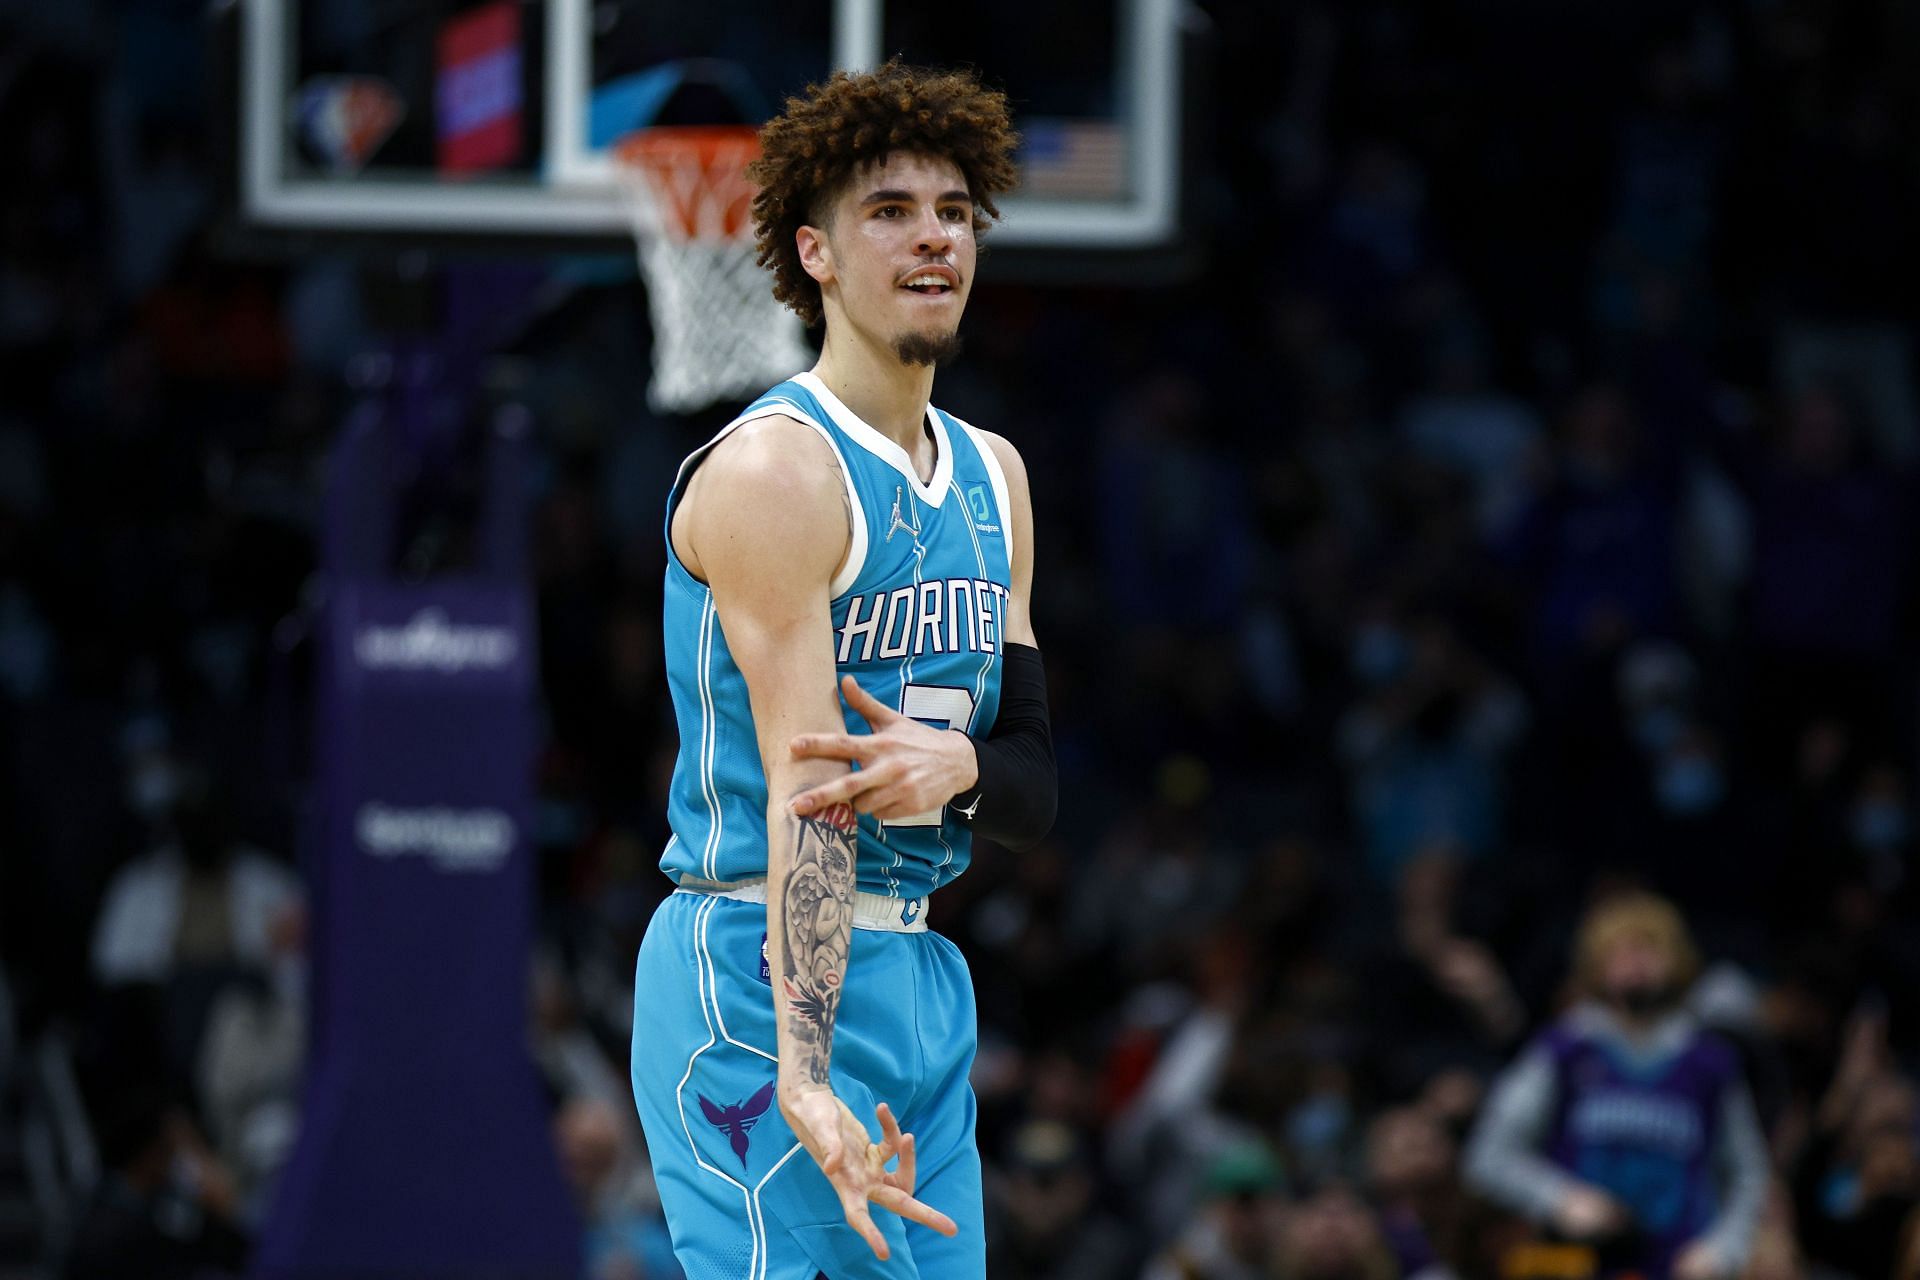 LaMelo Ball is set to make his first All-Star appearance